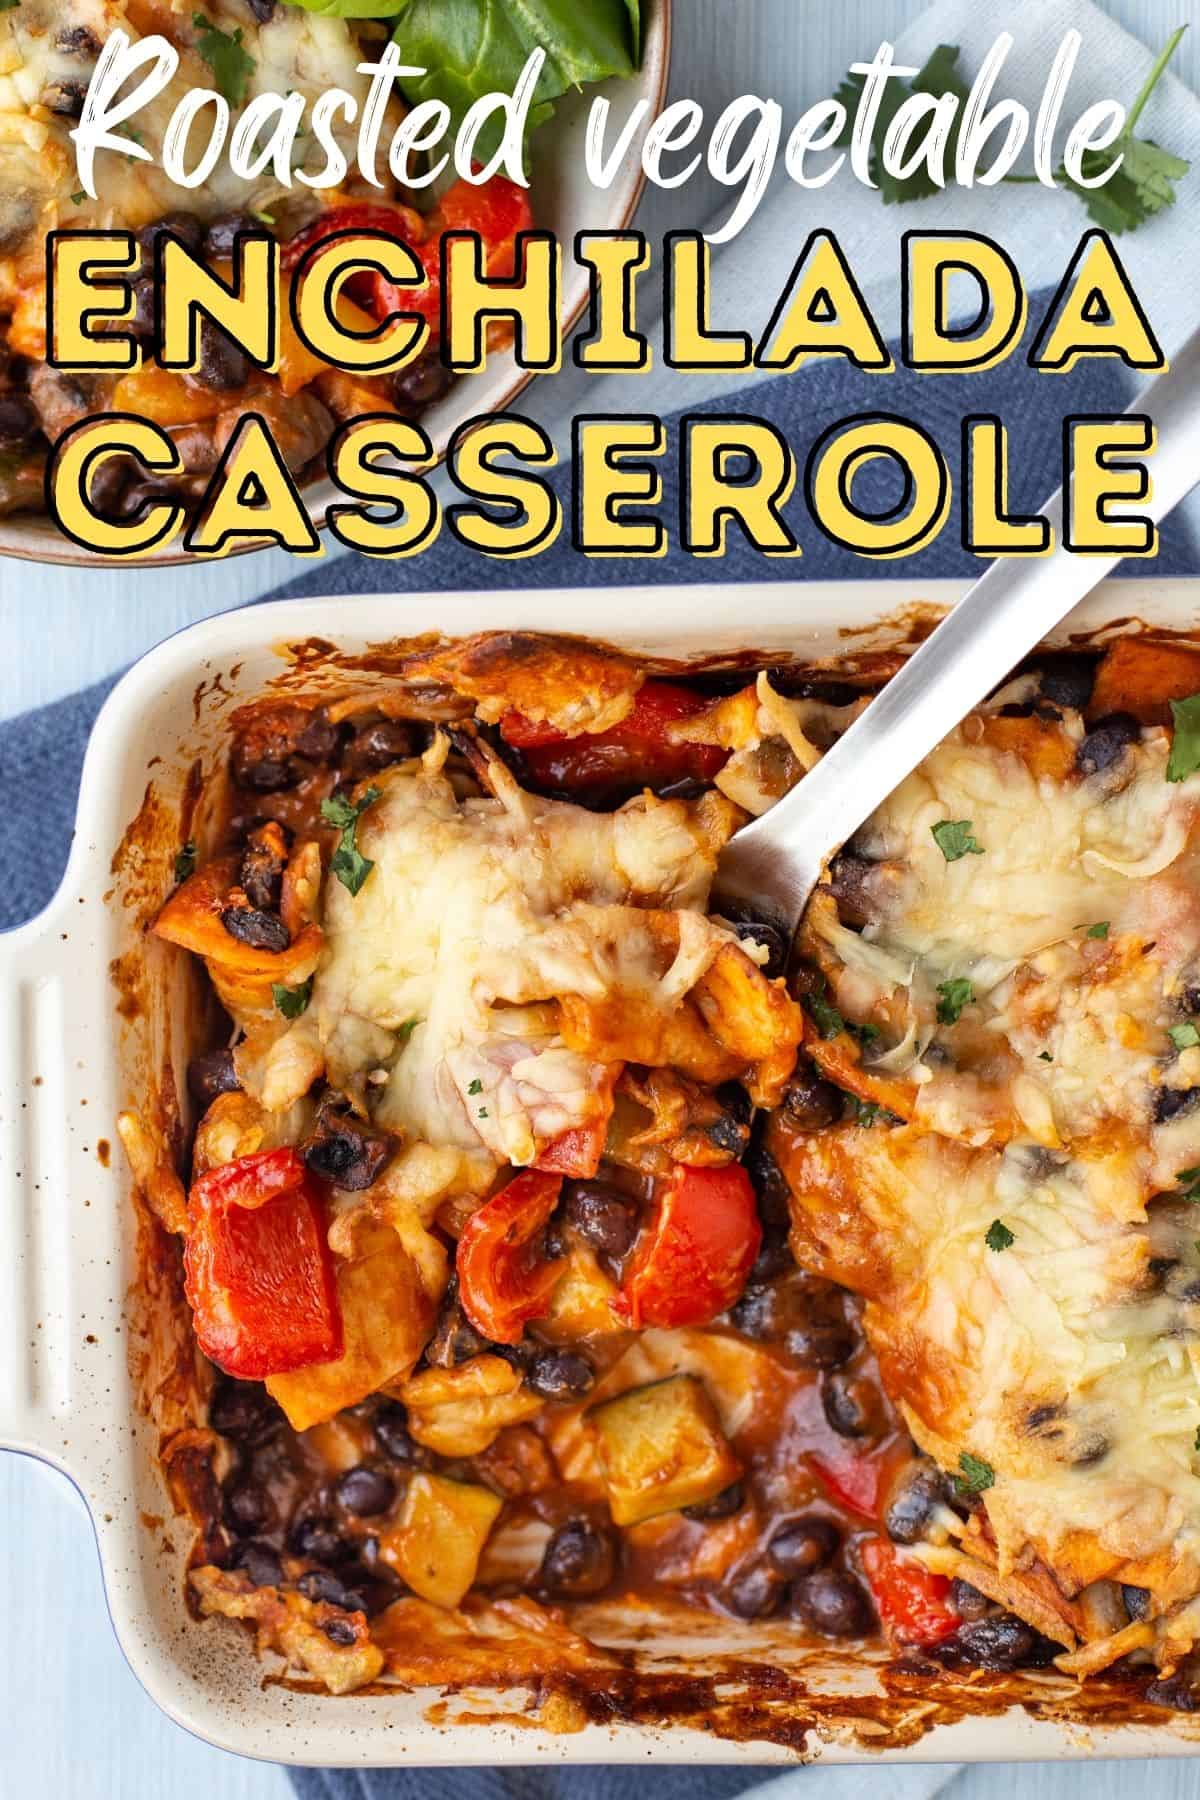 A baking dish of enchilada casserole, with a large scoop removed.